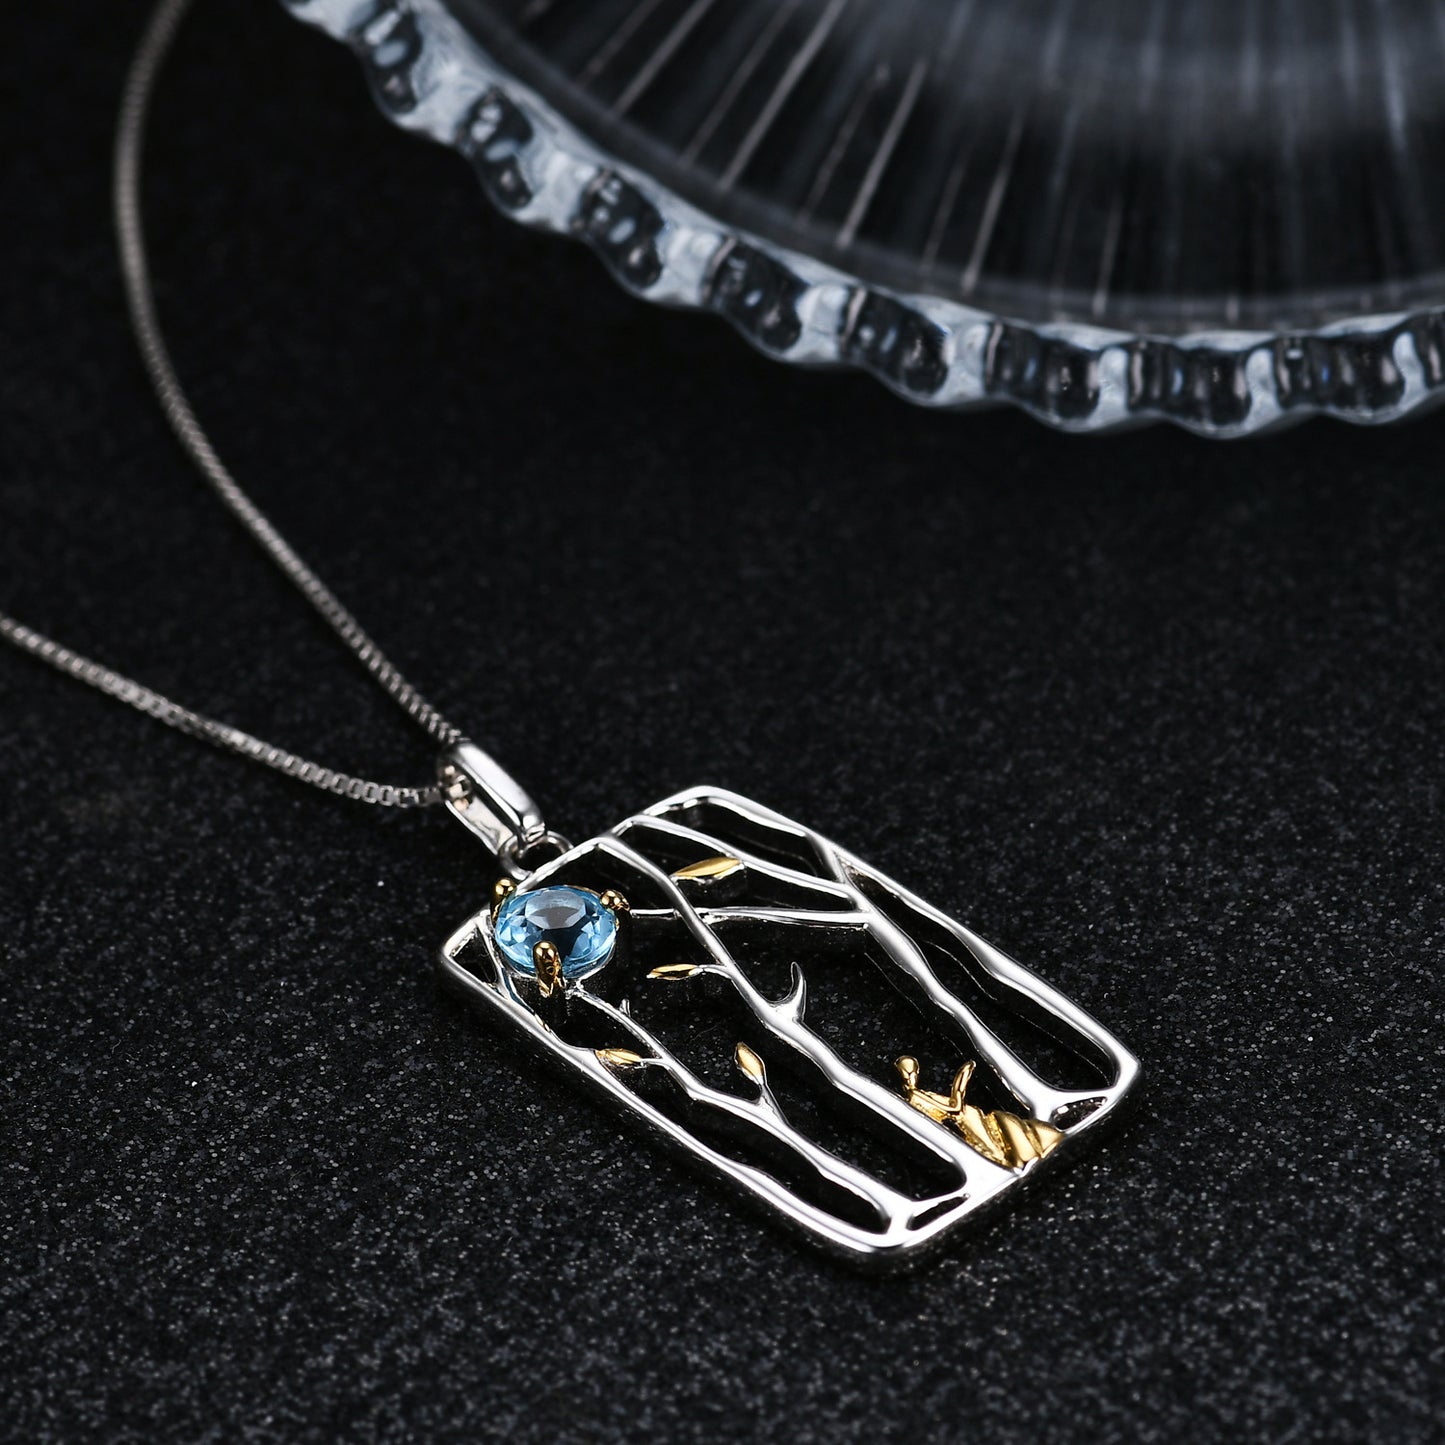 Italian Craftsman Jewelry Abstract Design Inlaid Natural Topaz Rectangle Pendant Silver Necklace for Women